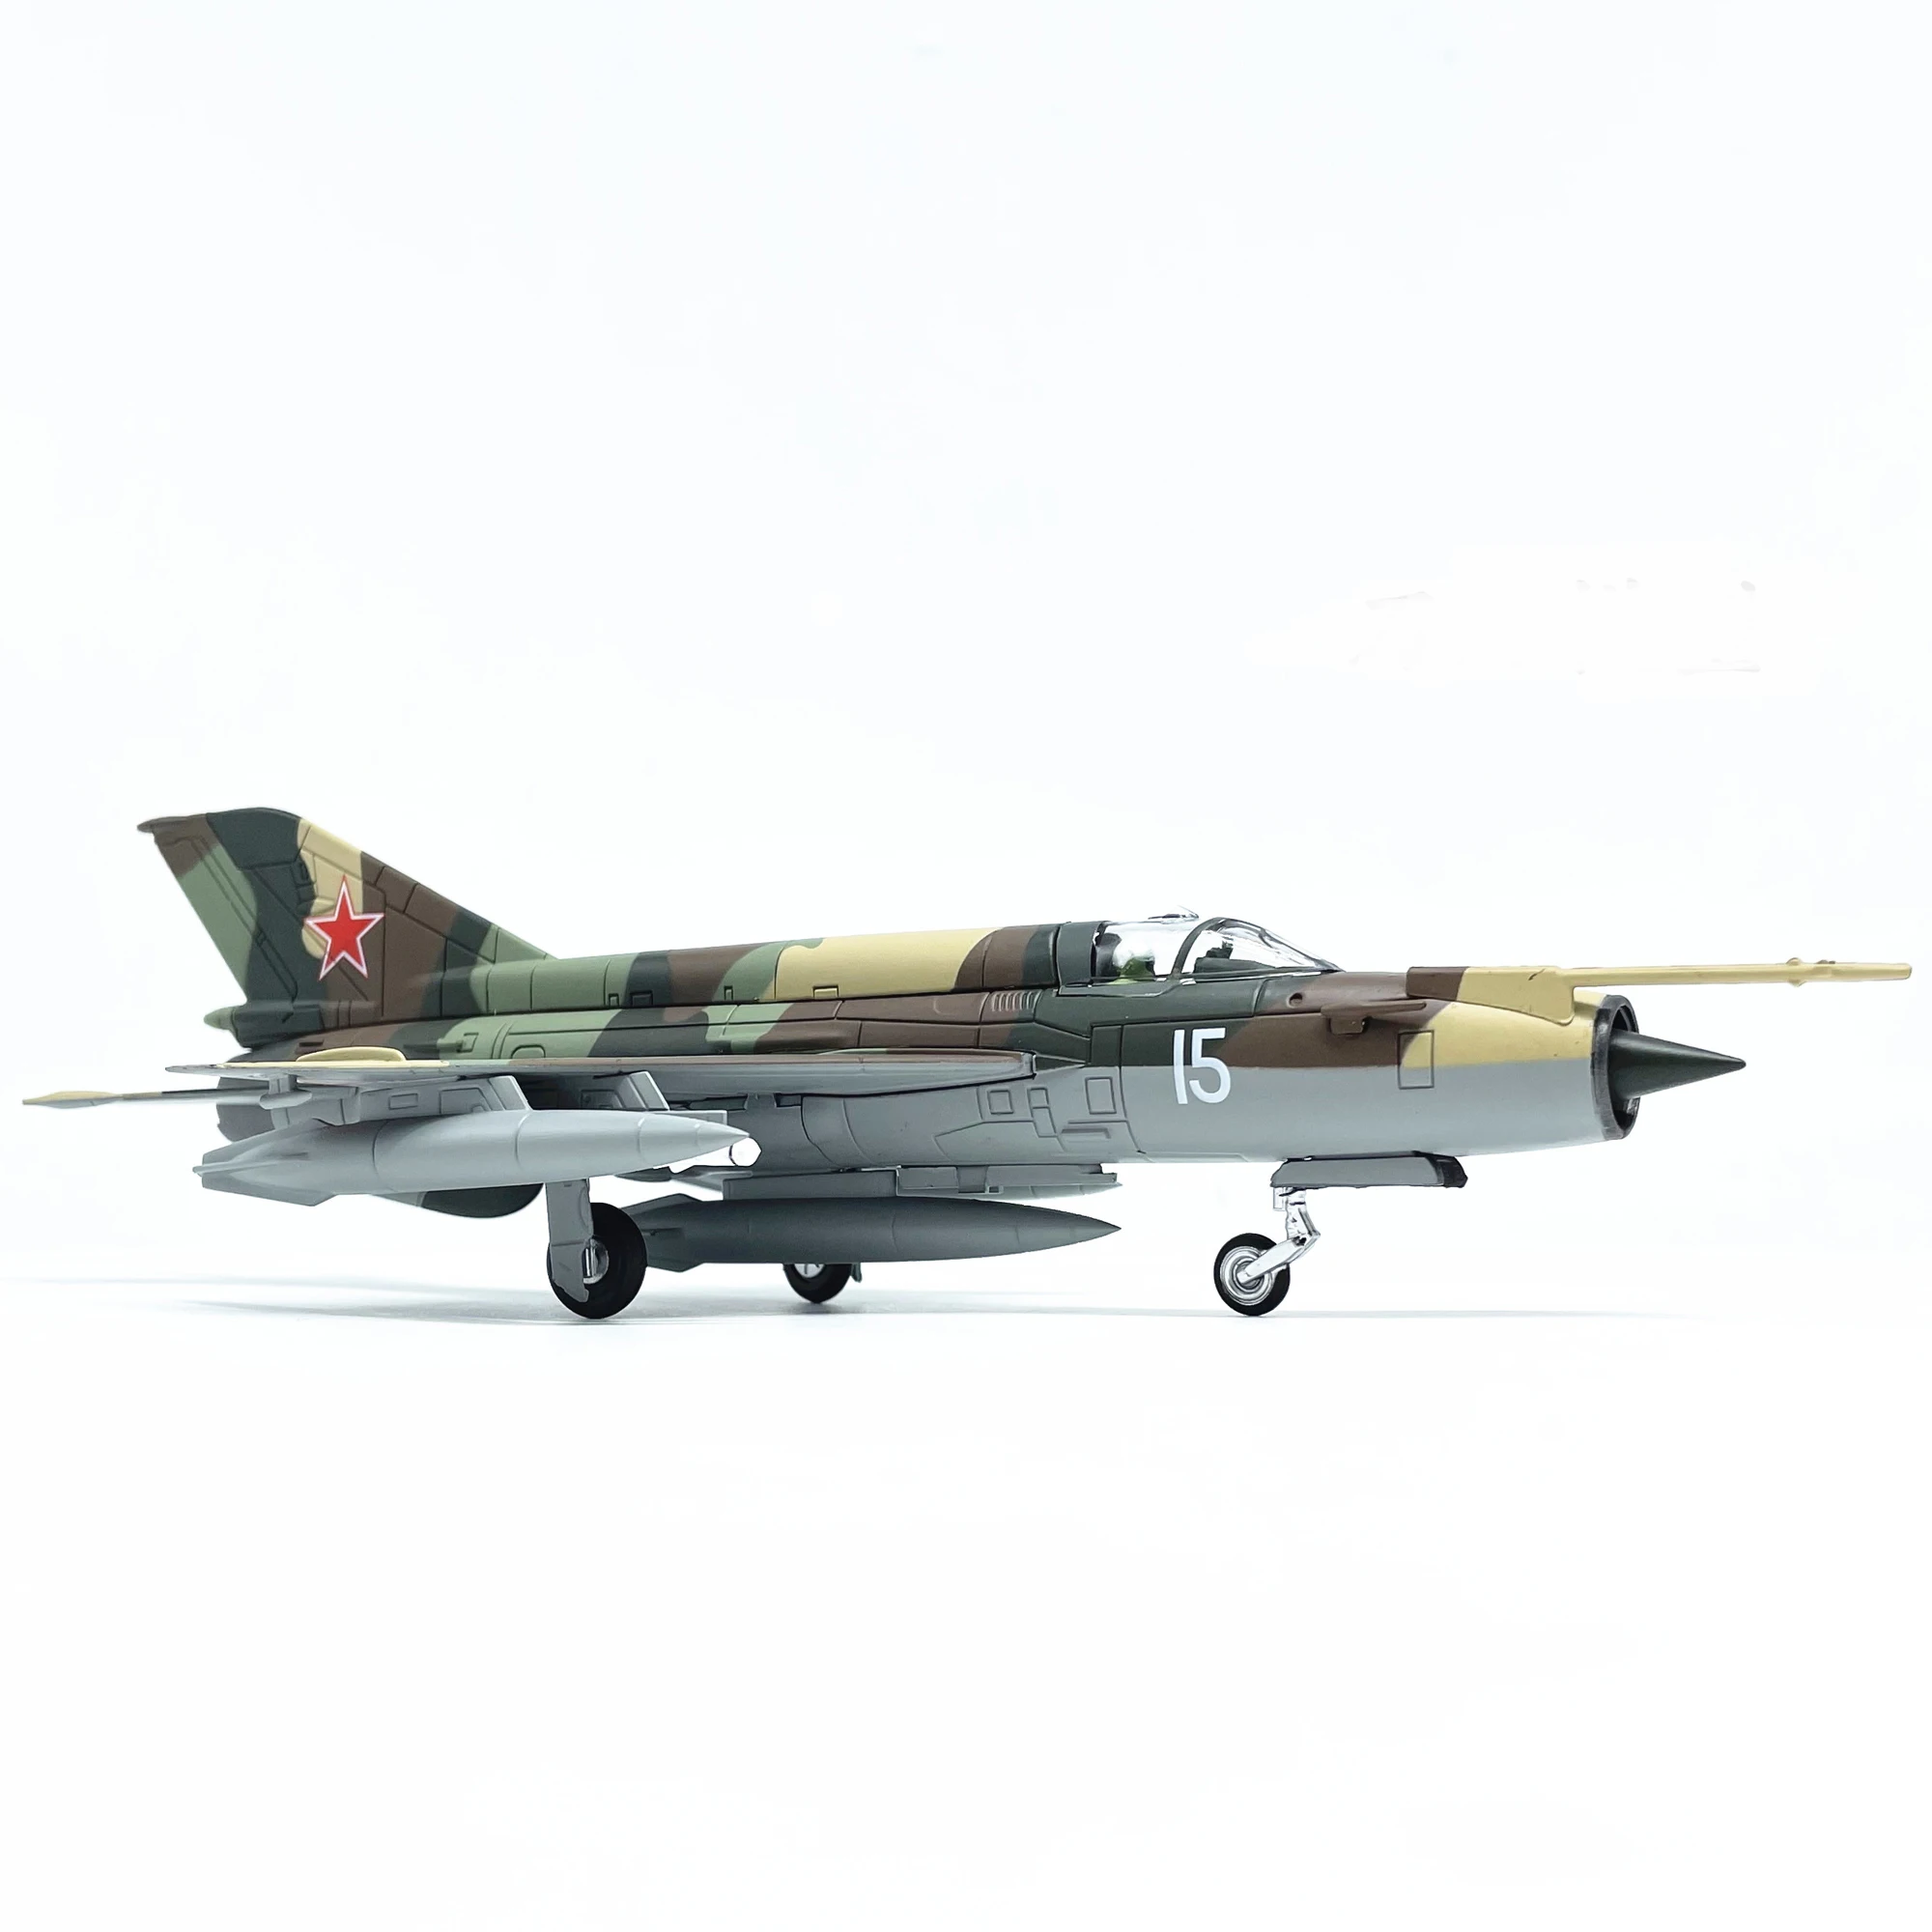 

Diecast 1:72 Scale Soviet Air Force MIG-21 Warplane Alloy & Plastic Simulation Model Gift Collection Decorative Toy Diecast